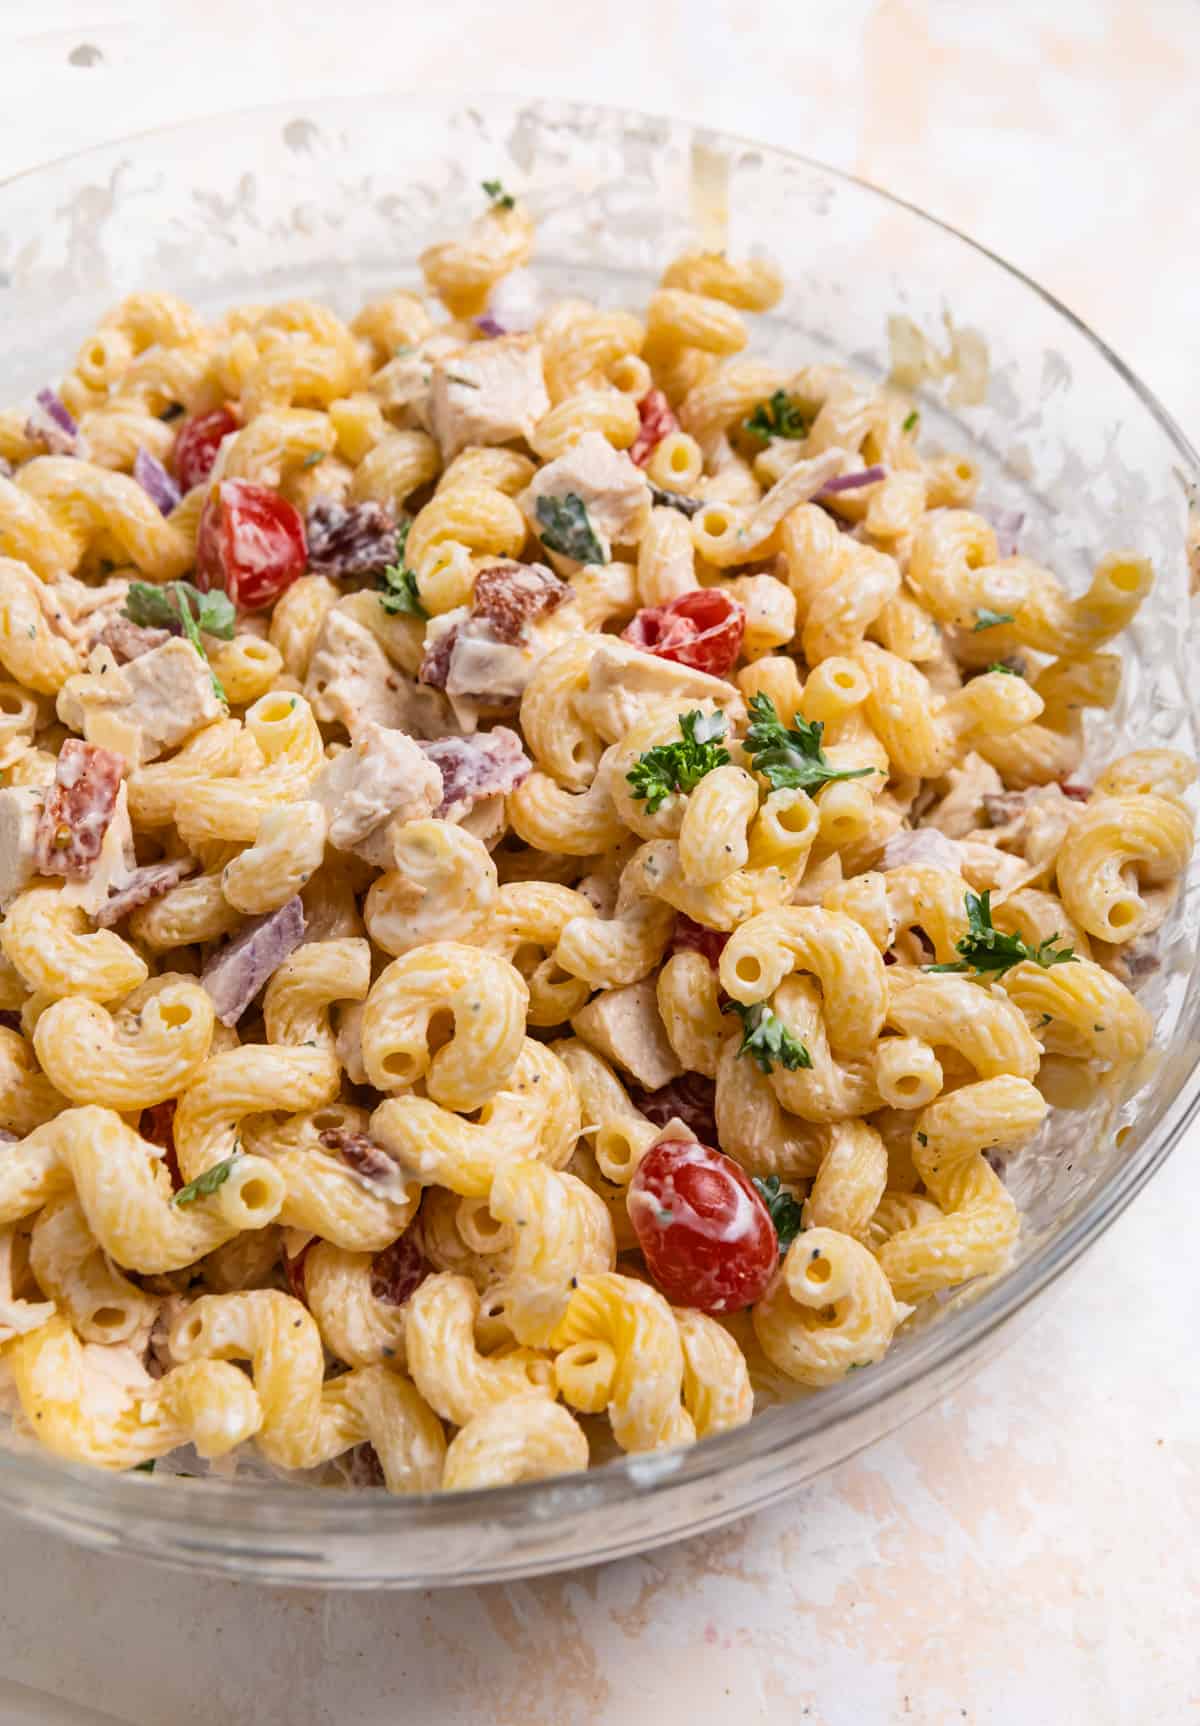 Chicken bacon ranch pasta salad tossed in ranch in mixing bowl